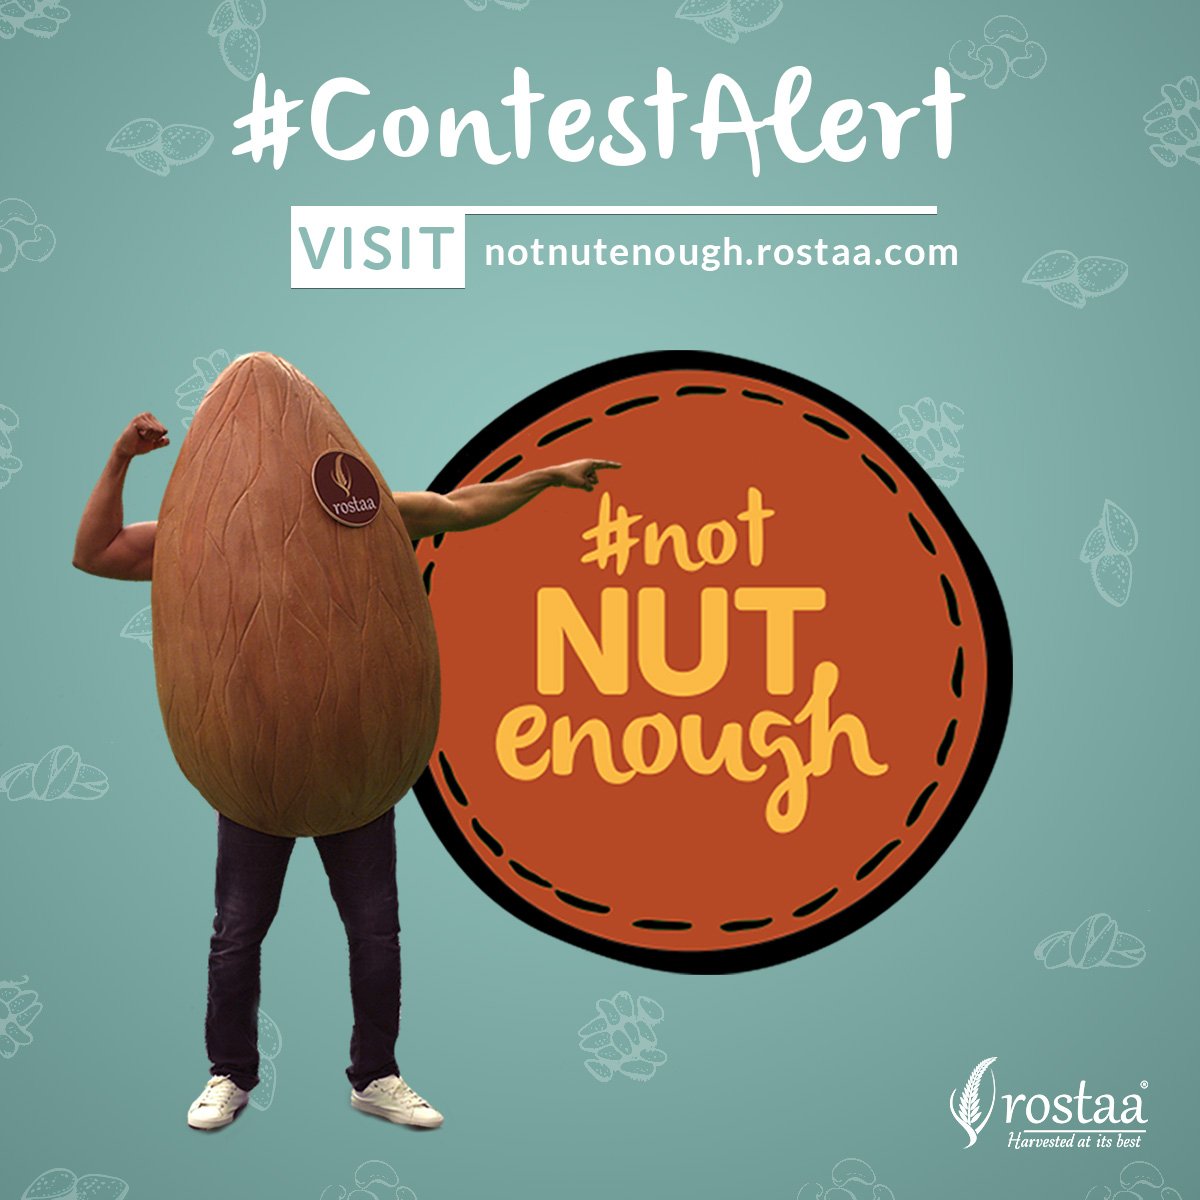 Brace yourself for the nuttiest quiz! But first register on bit.ly/2qLLz8Bnne and share the #NotNutEnough video. #contestalert